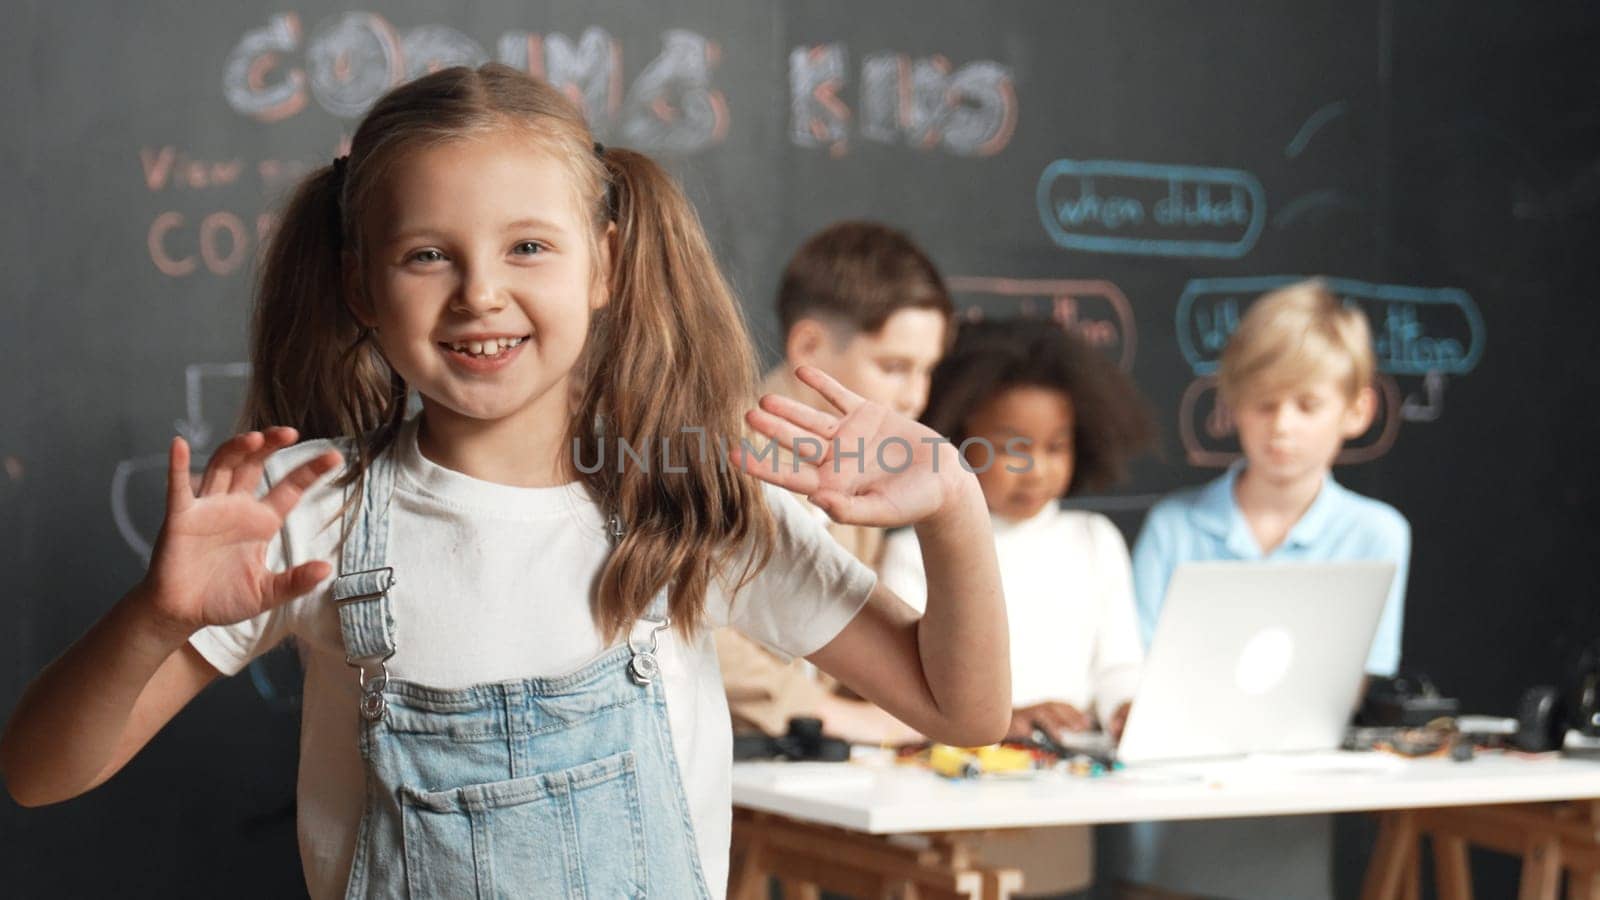 Girl smile and wave to camera while friend working or learning engineering code or prompt in STEM technology classroom. Student looking at camera and greeting while children using laptop. Erudition.